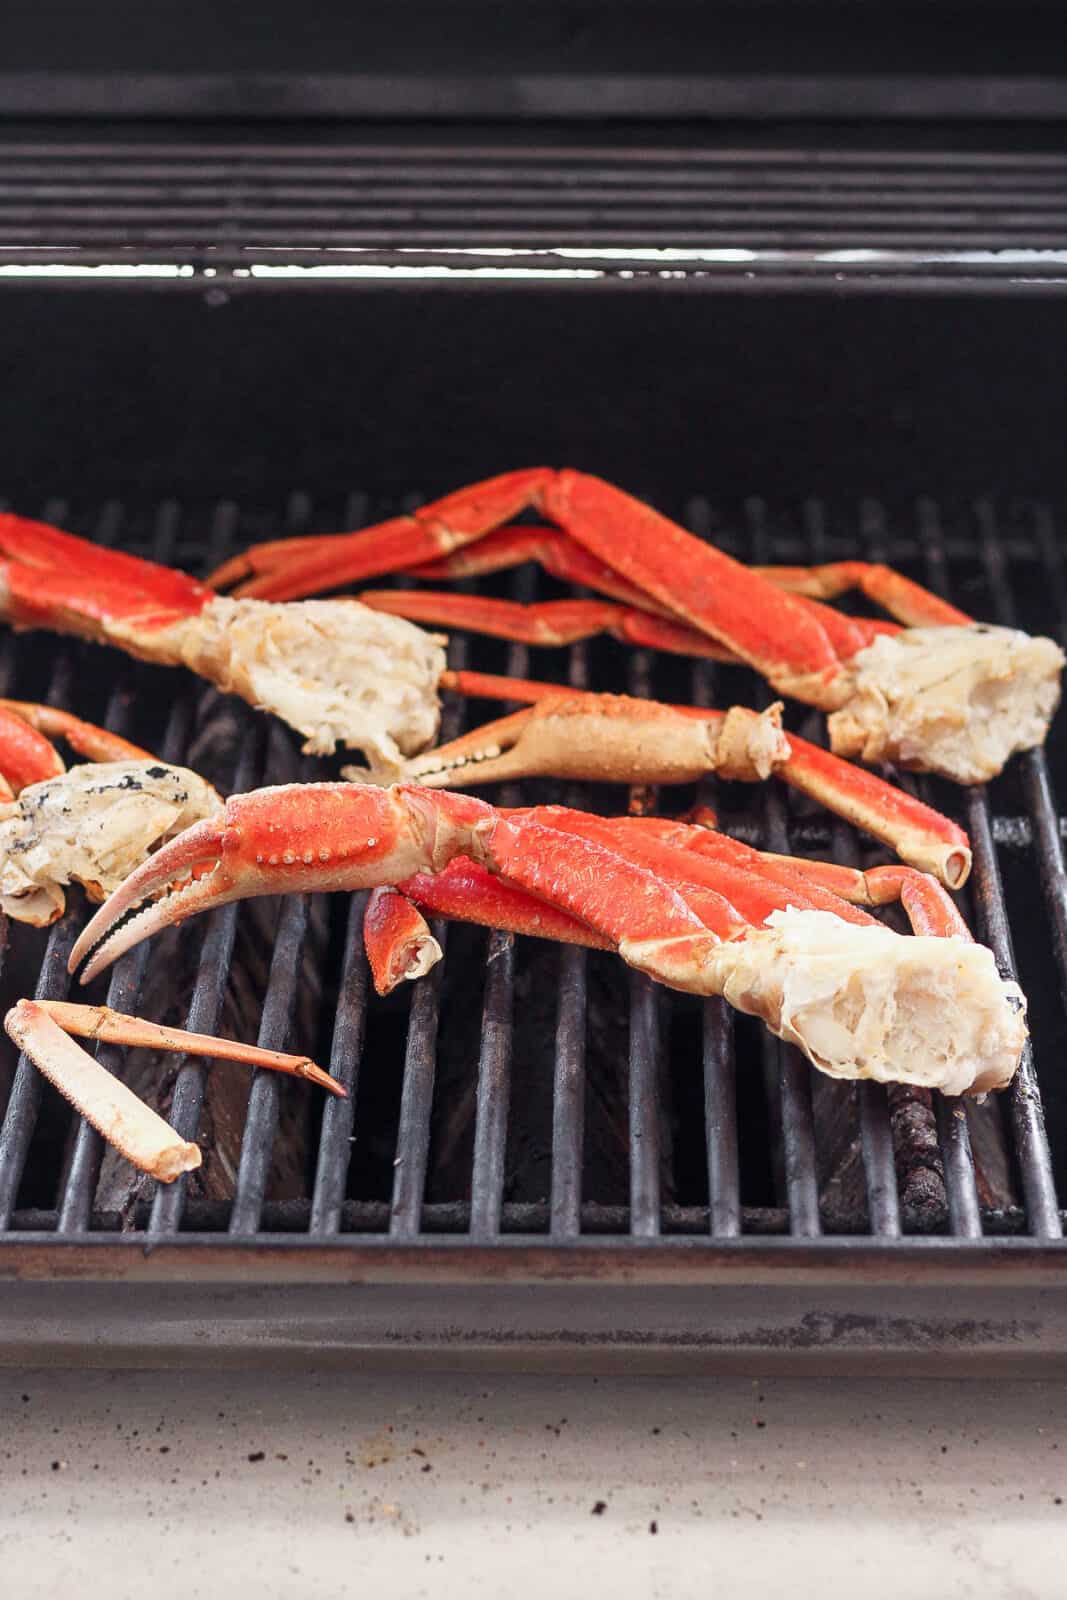 Crab legs on the grill.